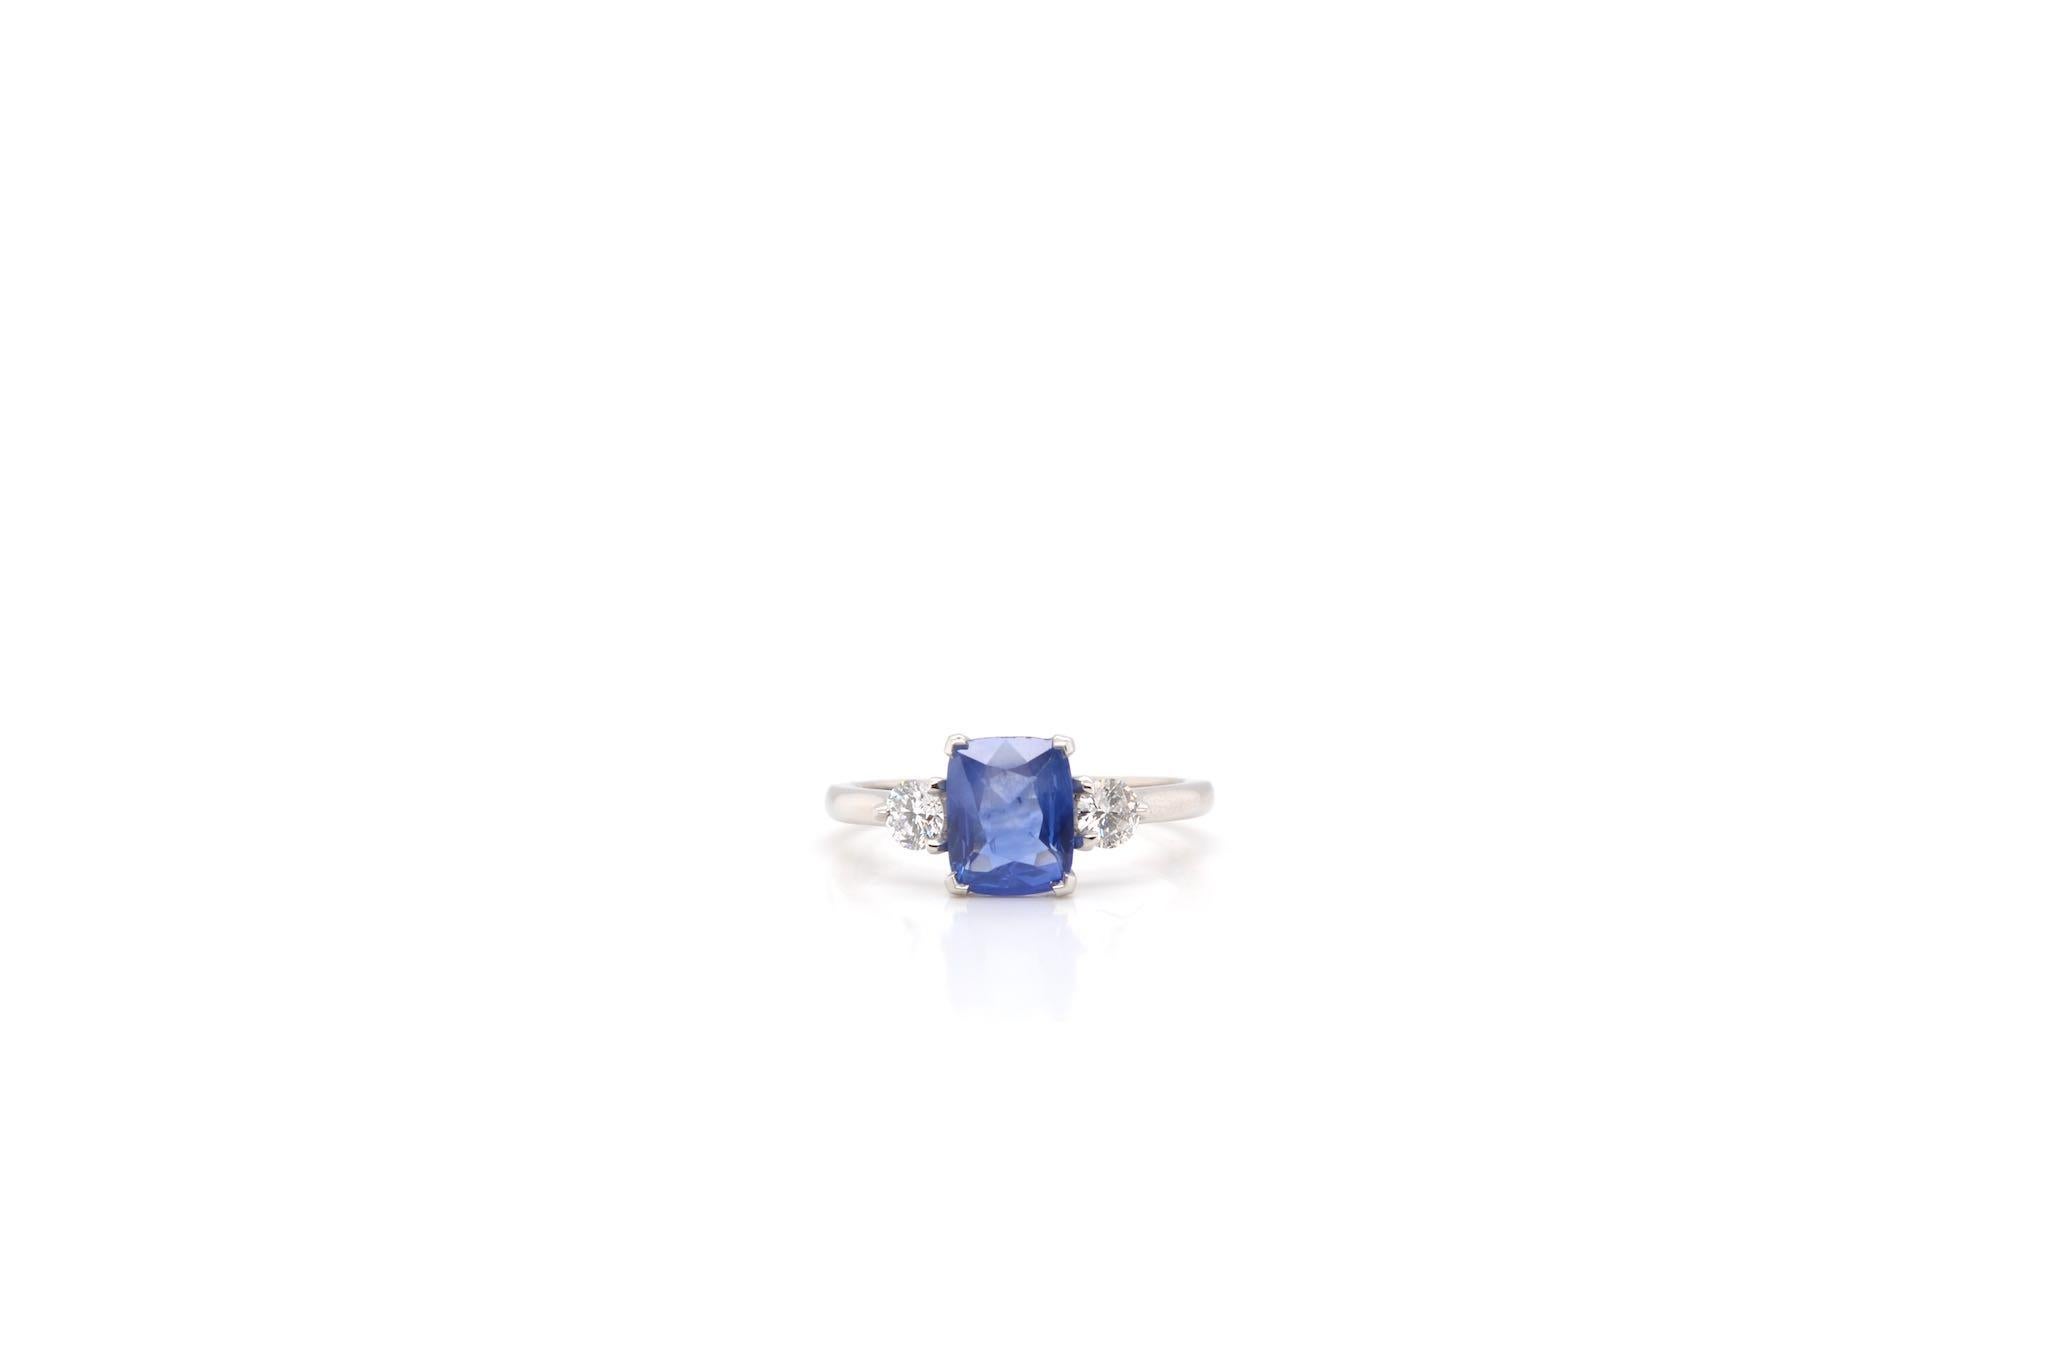 Stones: 1.71 carats Ceylon Sapphire
and brilliant-cut diamonds for a total weight of 0.31 carat.
Material: Platinum
Dimensions: 8 mm length on finger
Weight: 4.3g
Size: 53 (free sizing)
Certificate
Ref. : 24456 / 24745